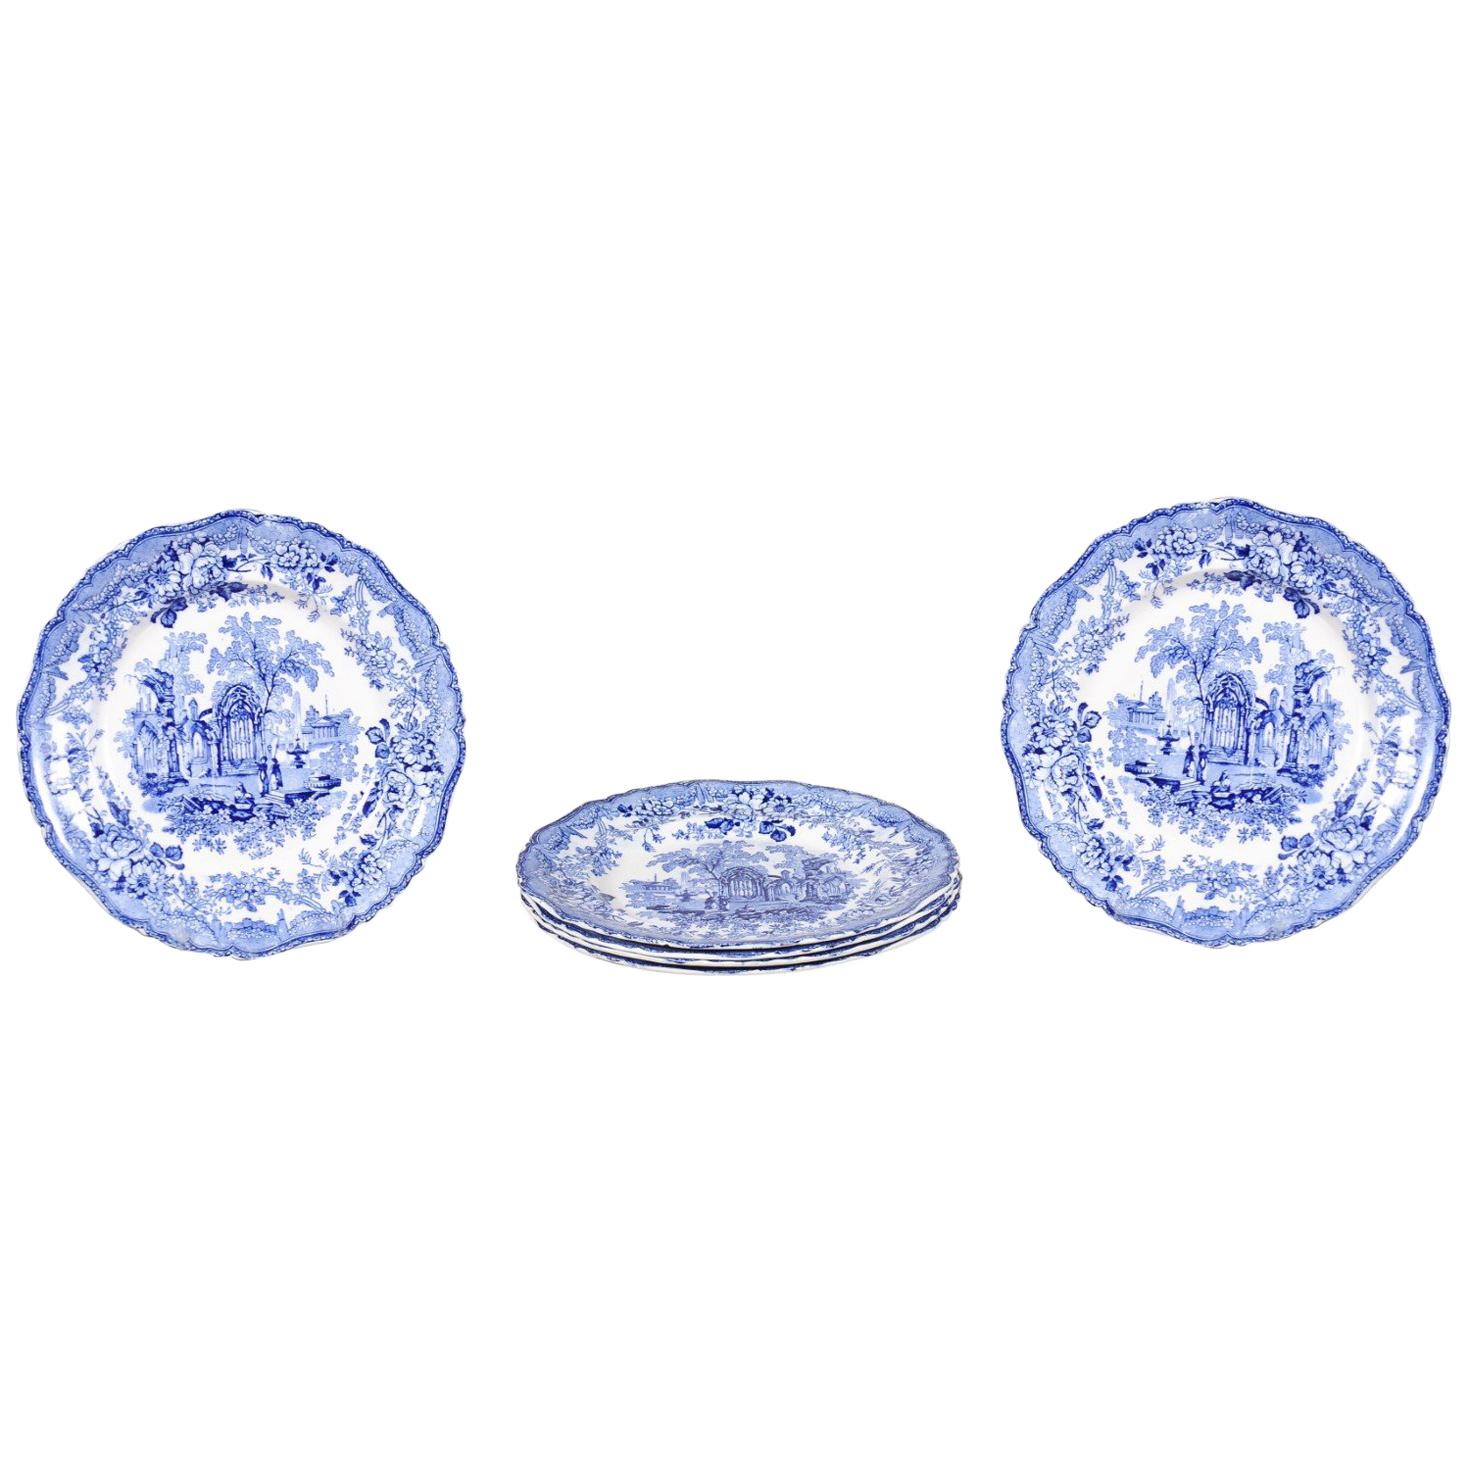 English Blue and White Transfer Plates with Gothic Ruins Motifs, 19th Century